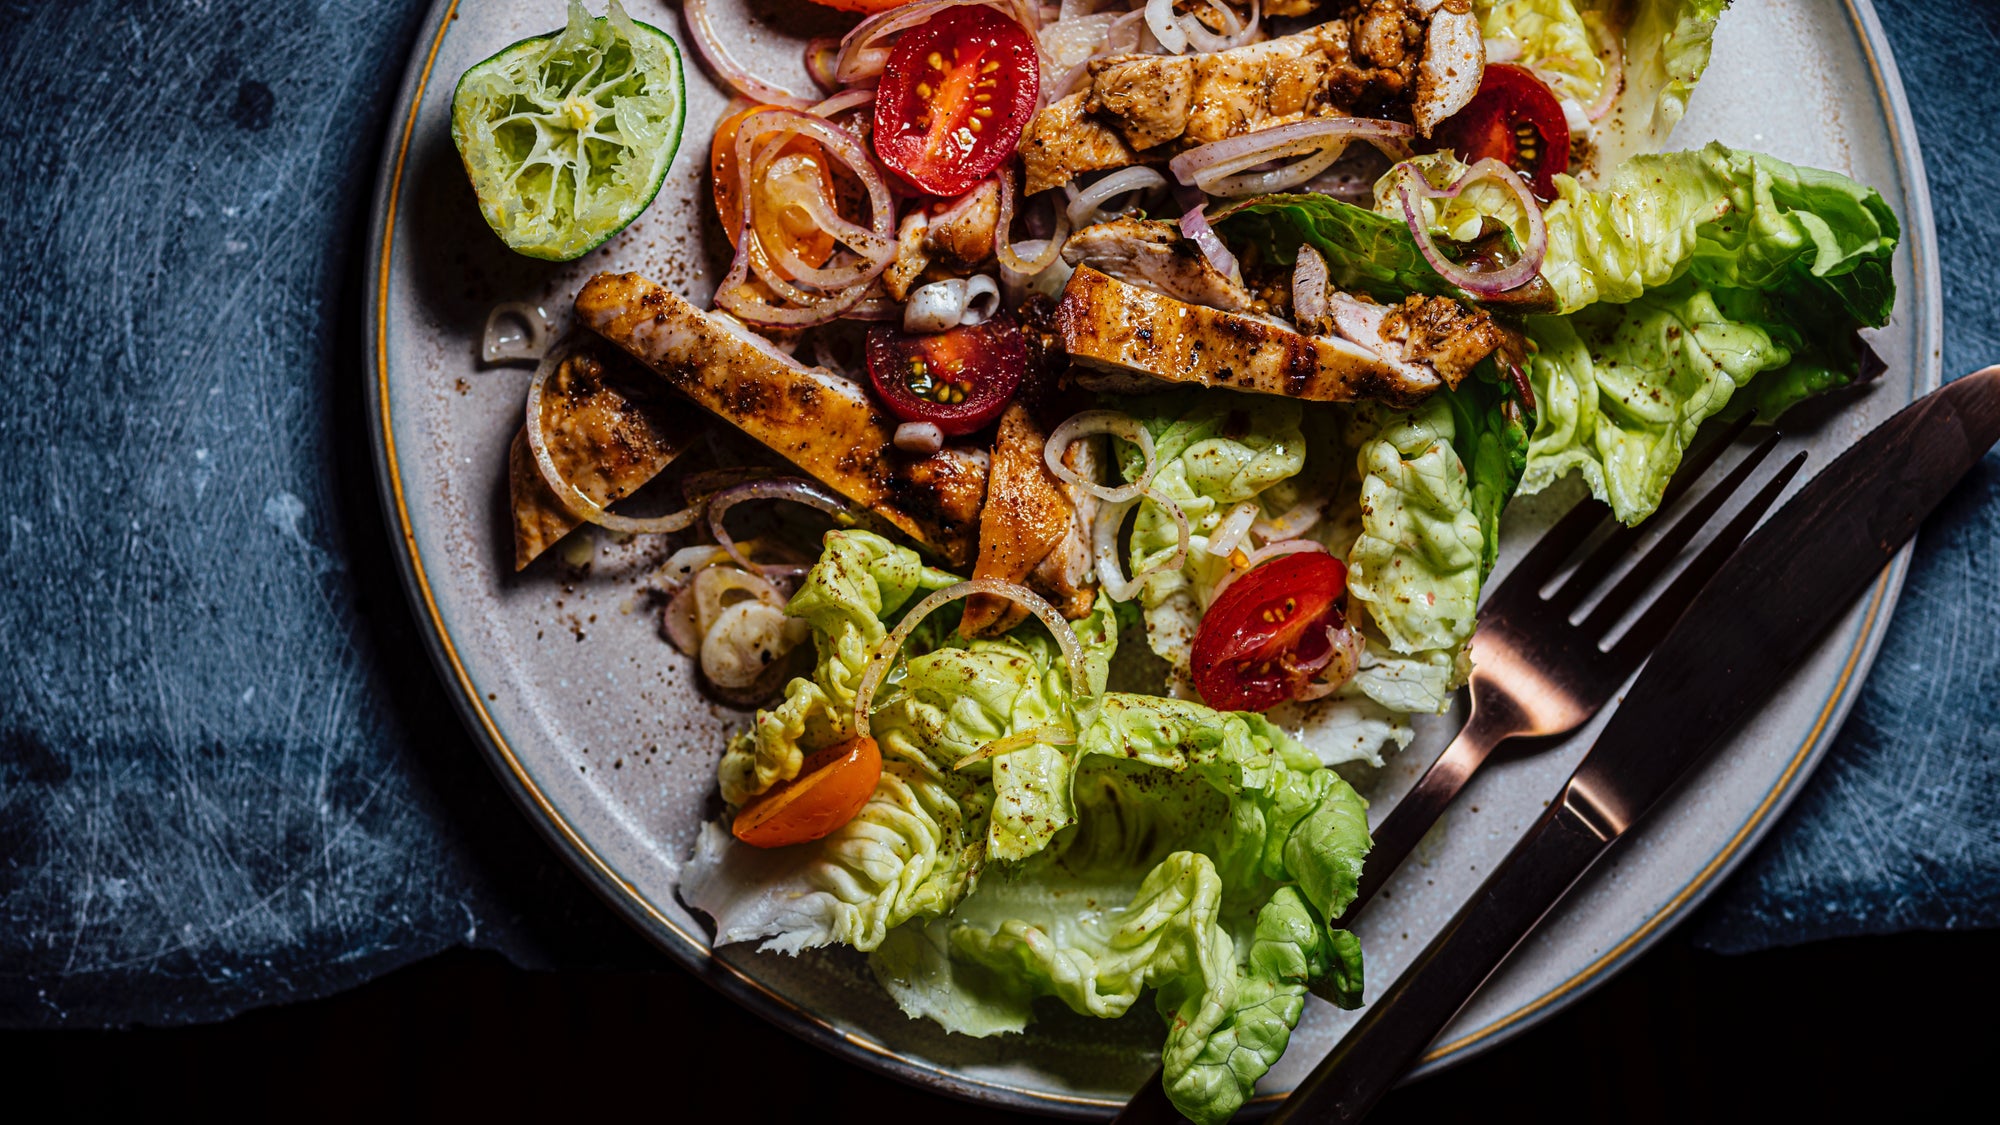 Grilled Spiced Chicken Salad with Amchur